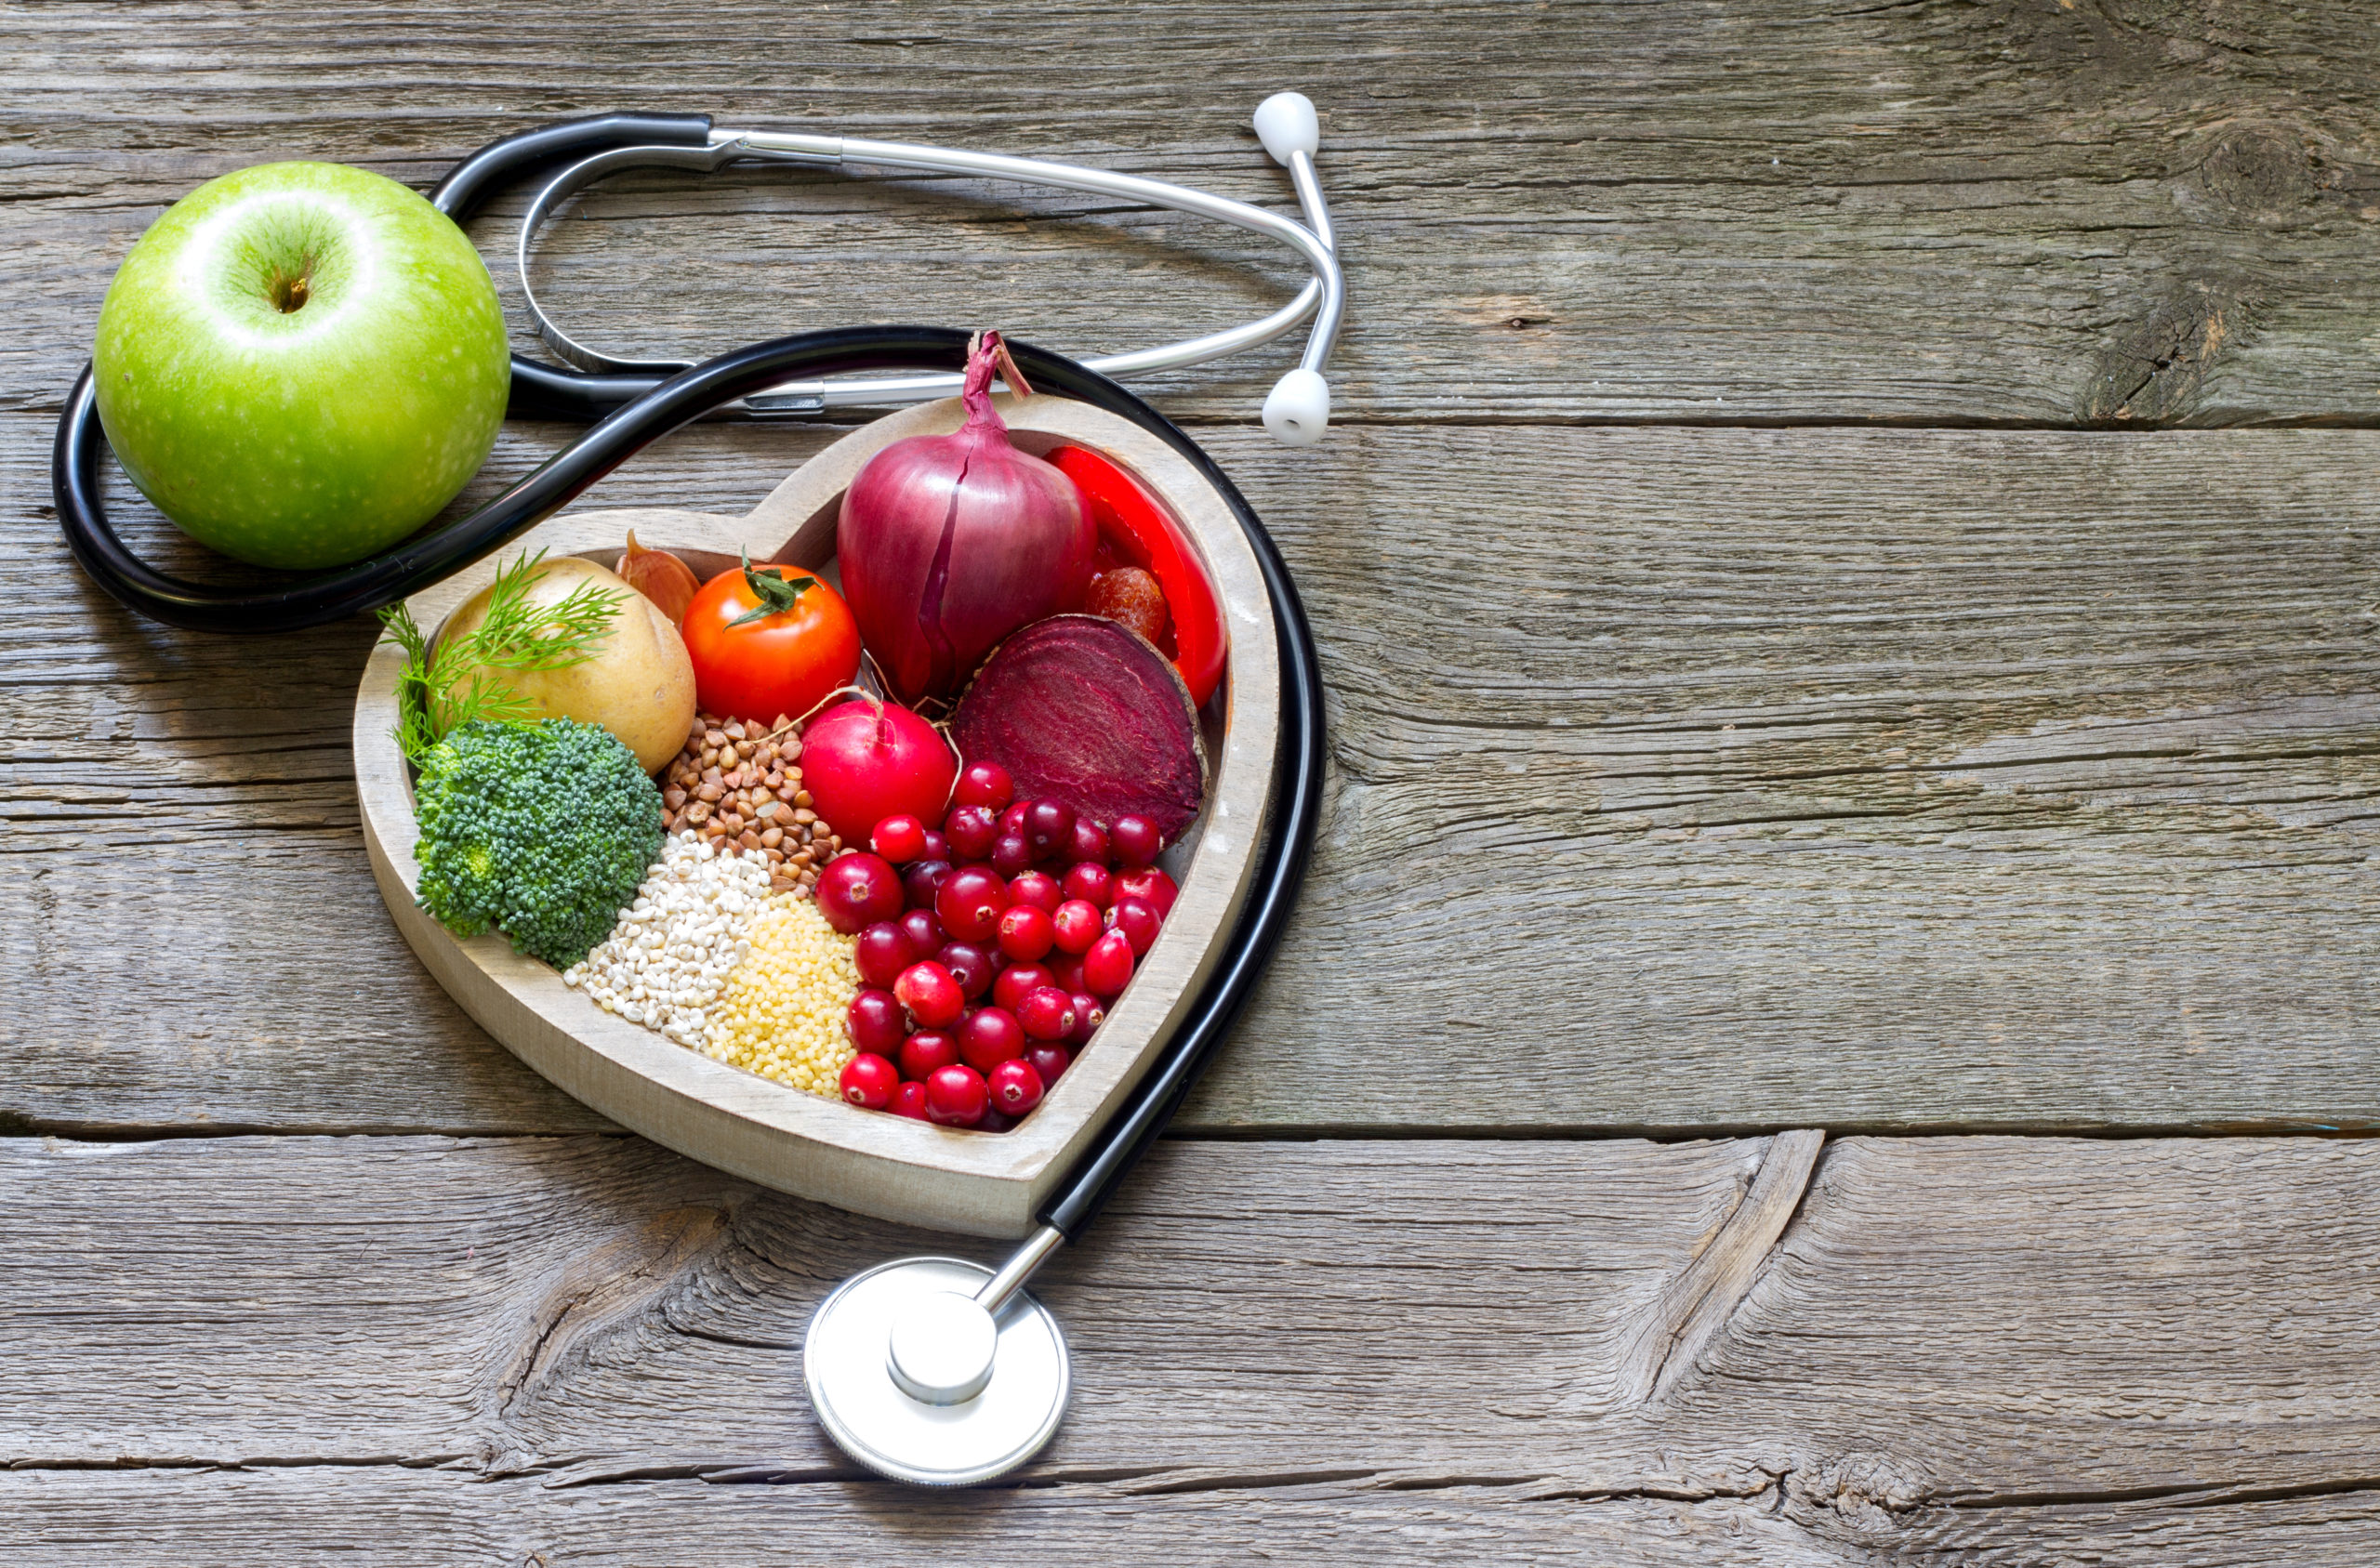 photo of a wooden table with fruits and vegetables in a heart shaped bowl with a stethoscope around it